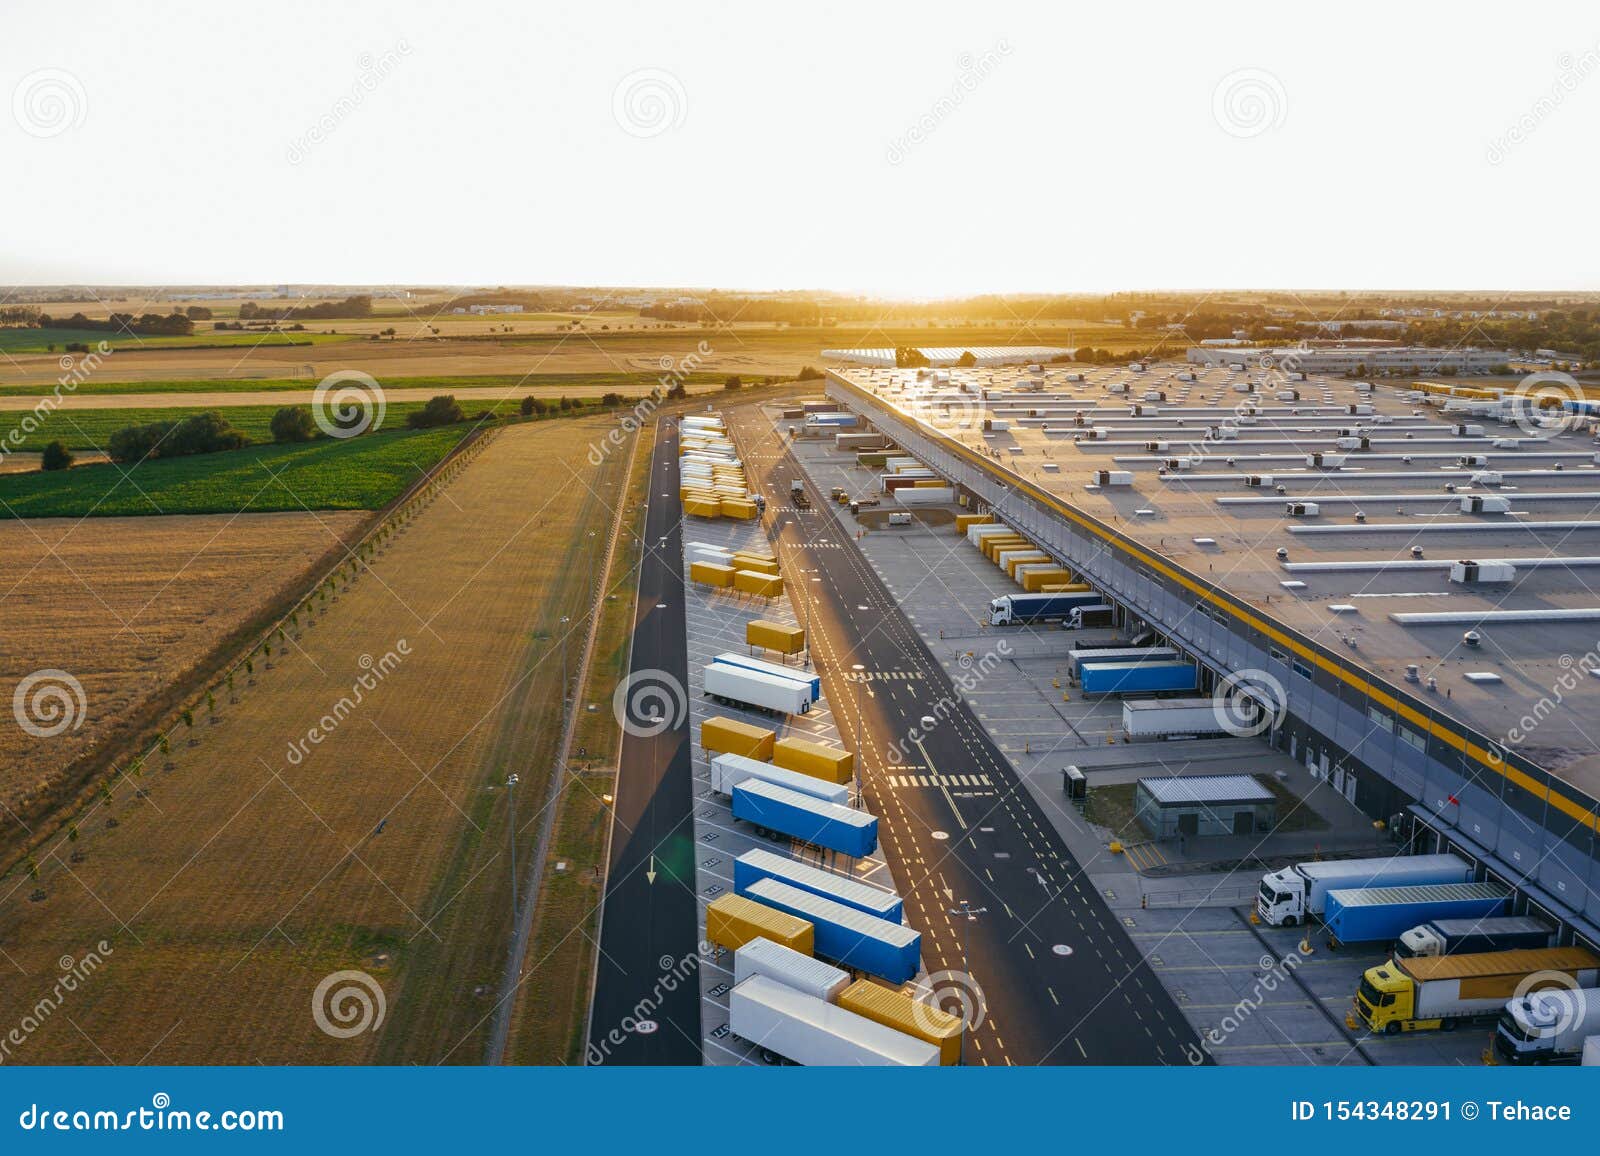 aerial view of the distribution center, drone photography of the industrial logistic zone.